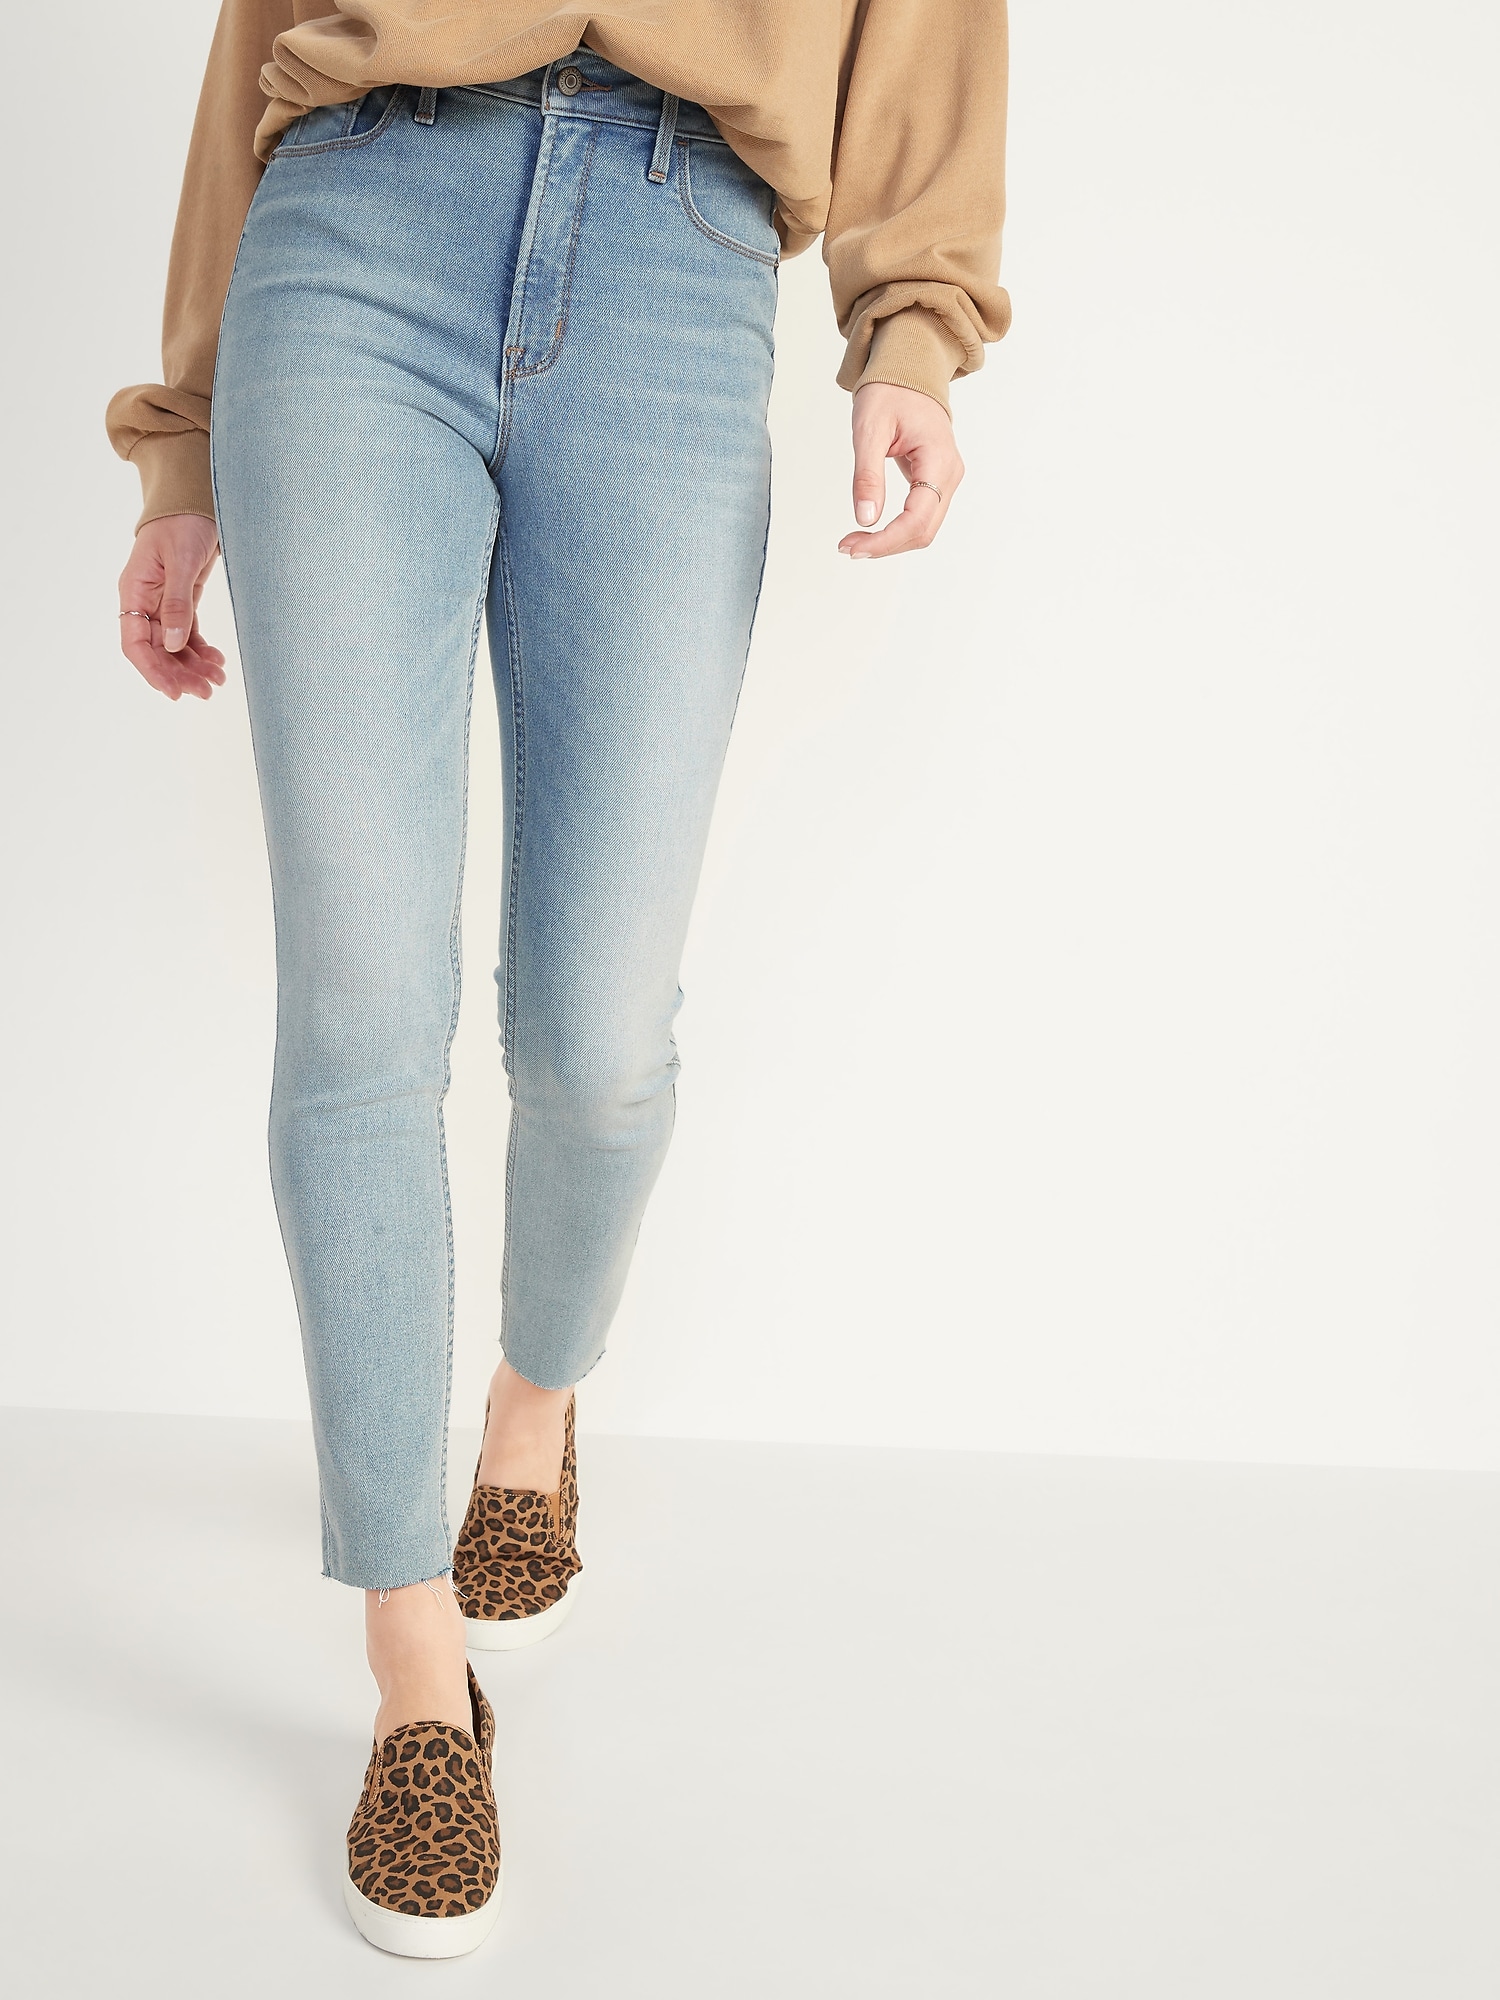 cut off ankle jeans